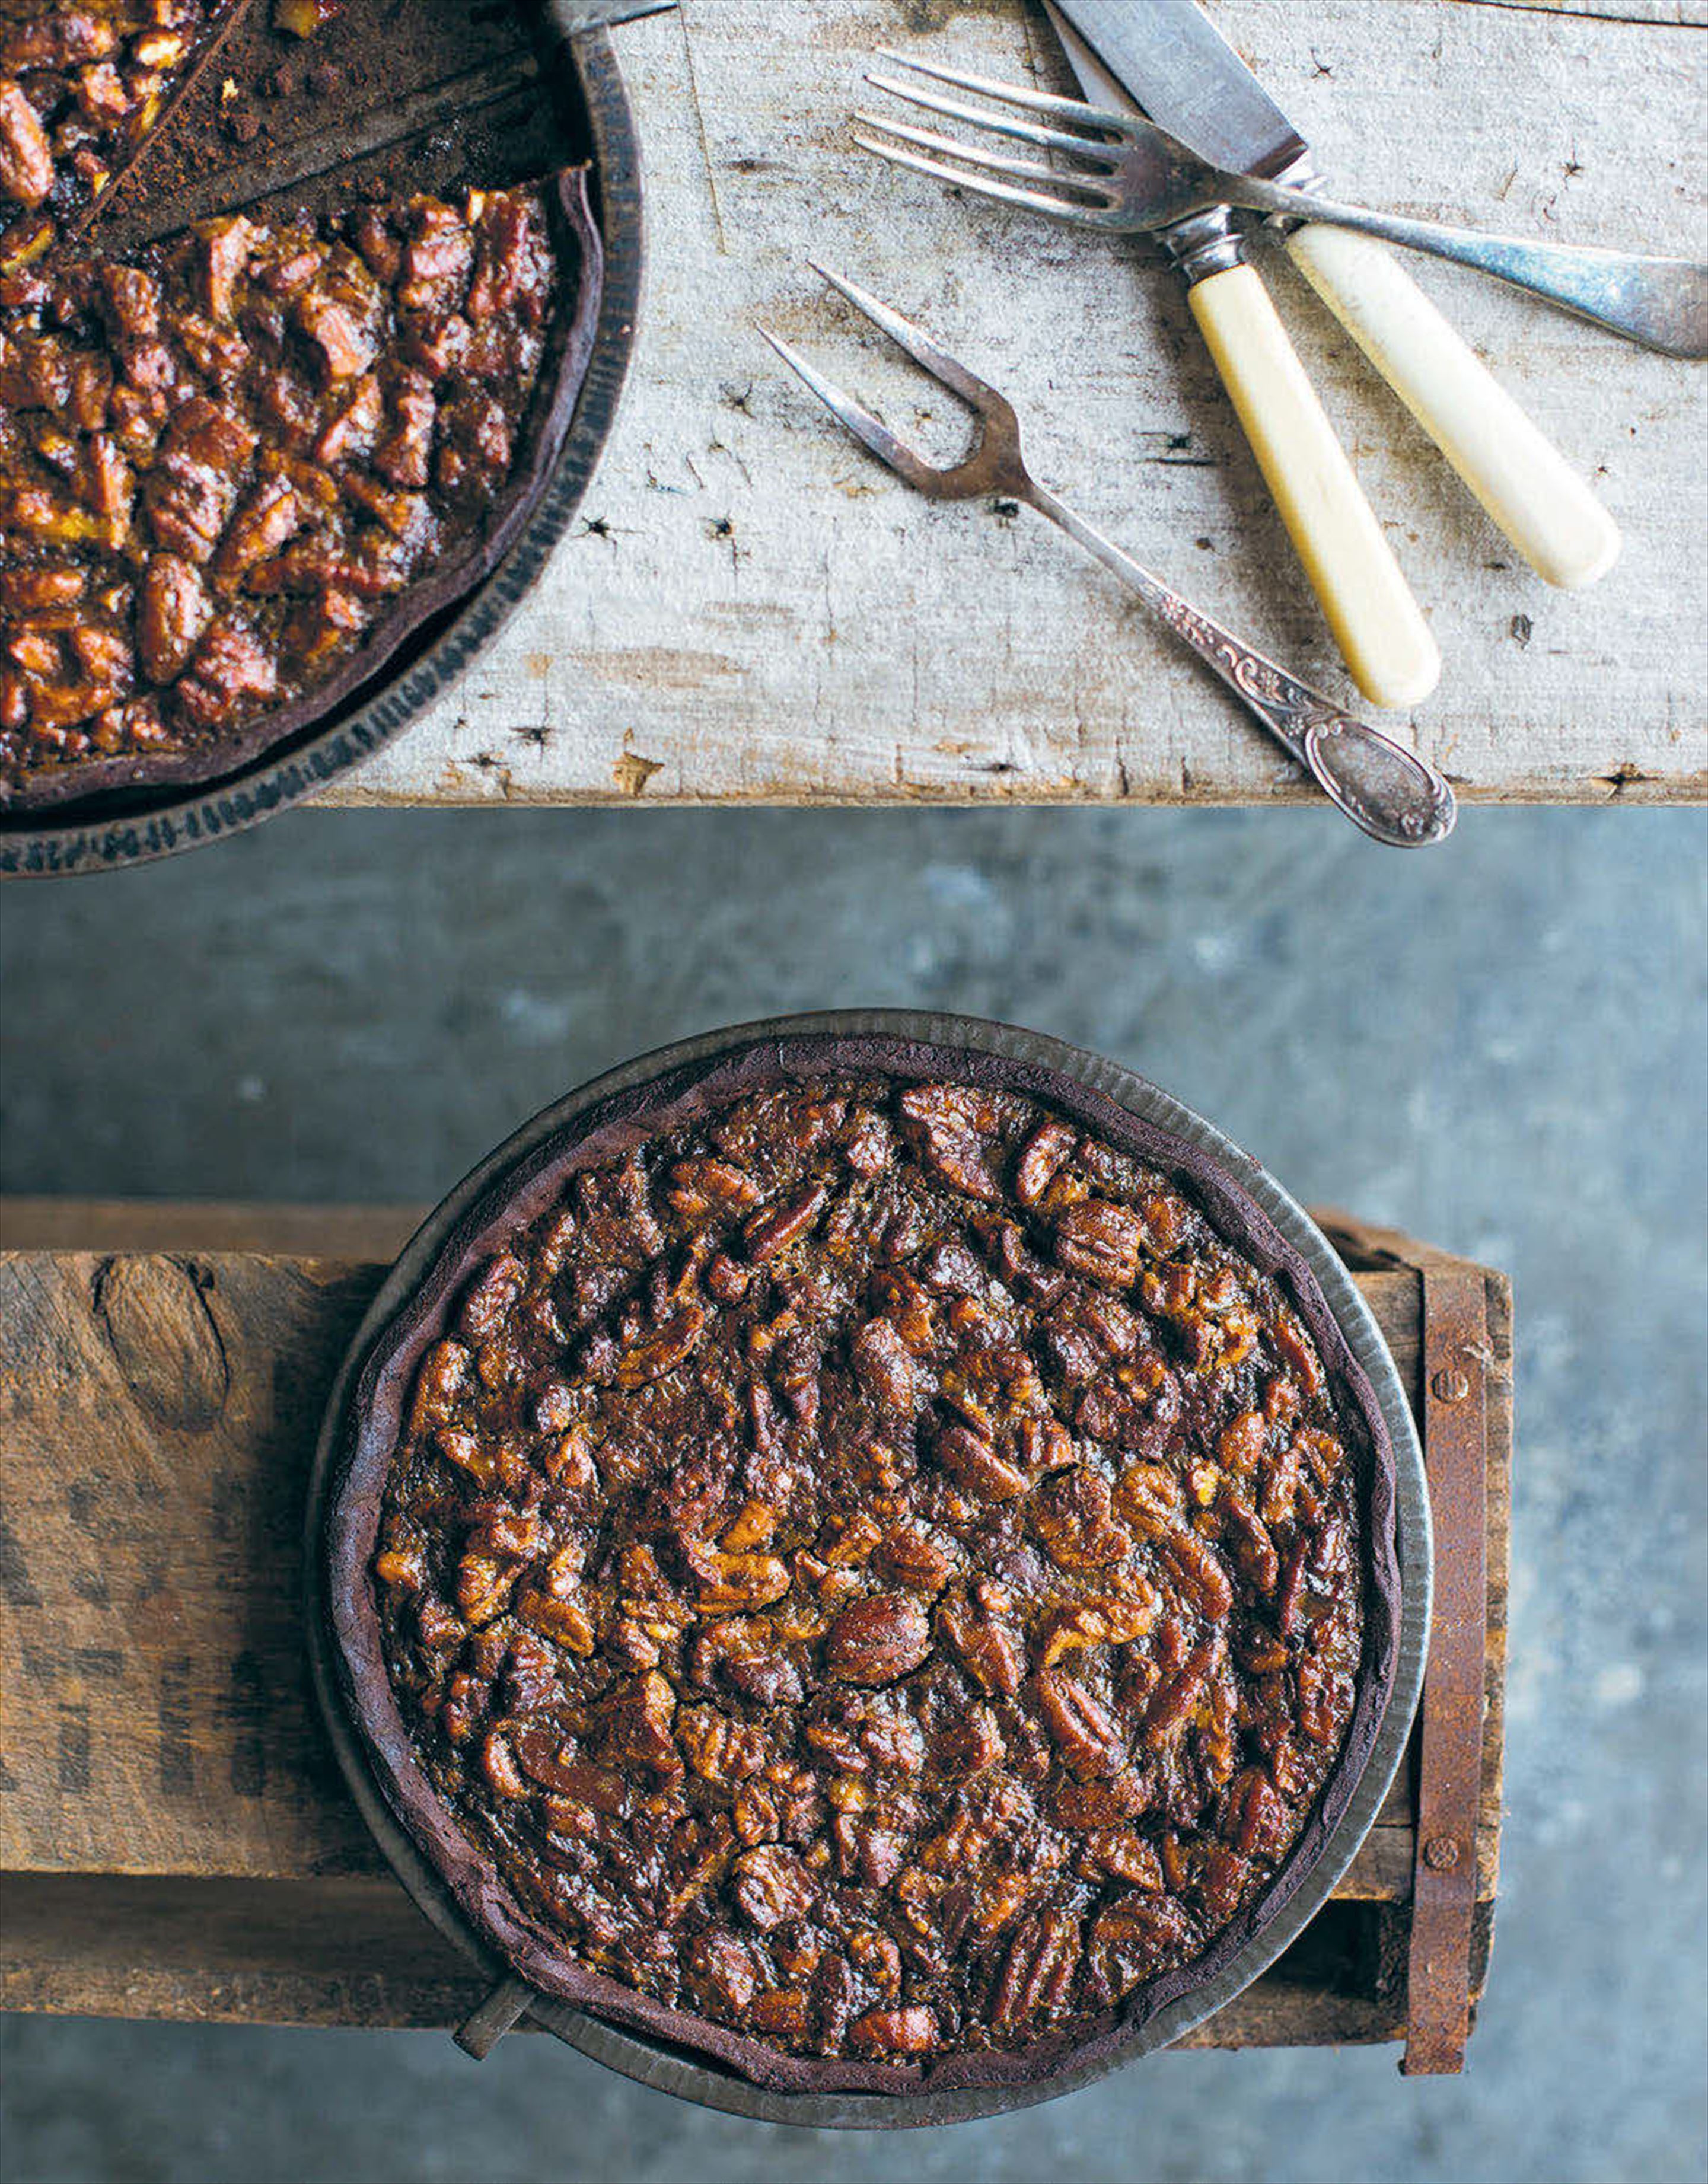 Golden syrup and chocolate pecan pies